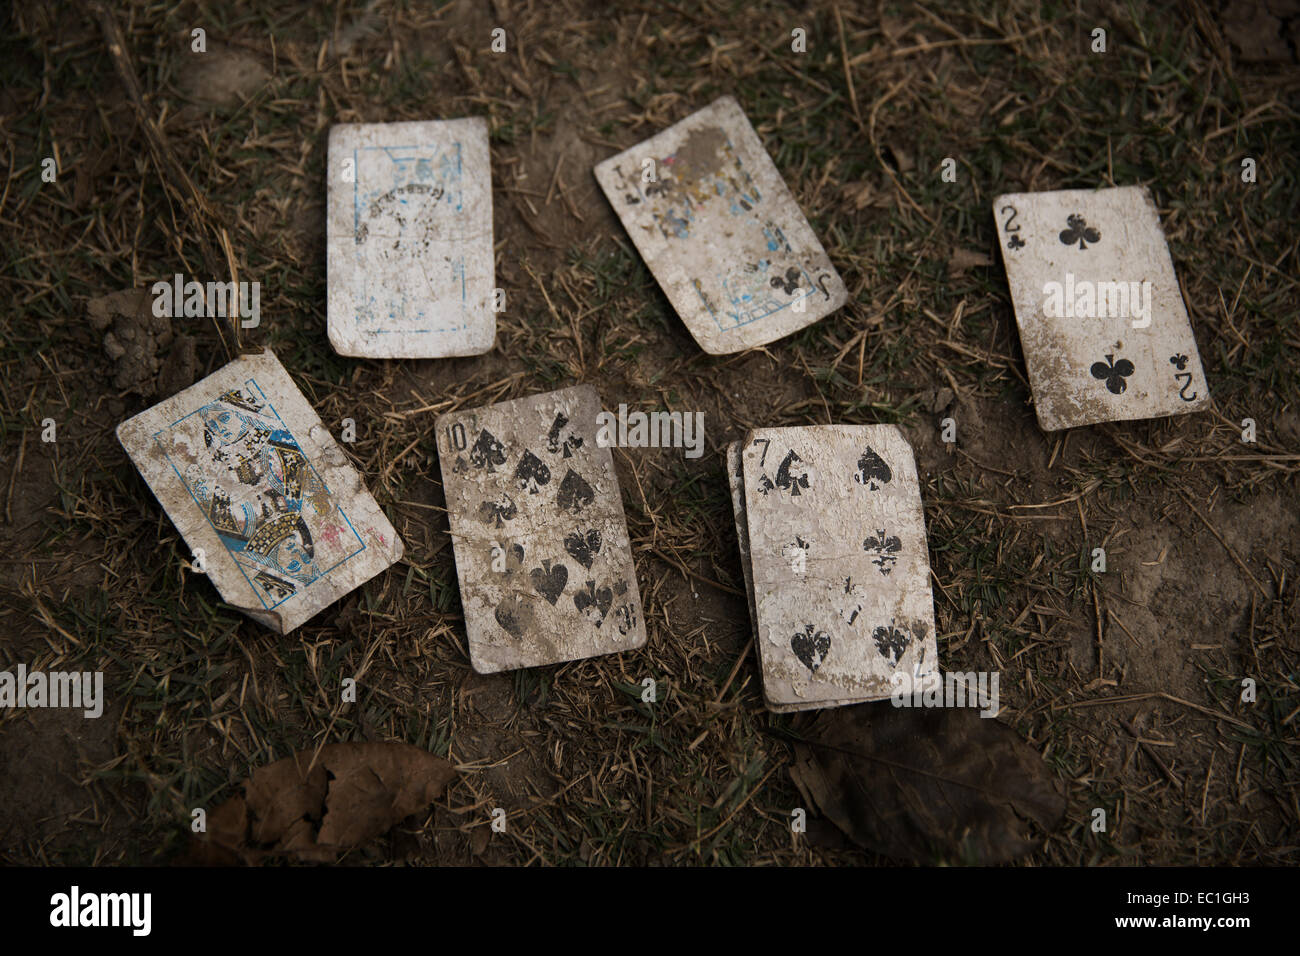 Old playing cards washed up on the riverbank of the Yamuna river, Agra, India. January 2014. Stock Photo